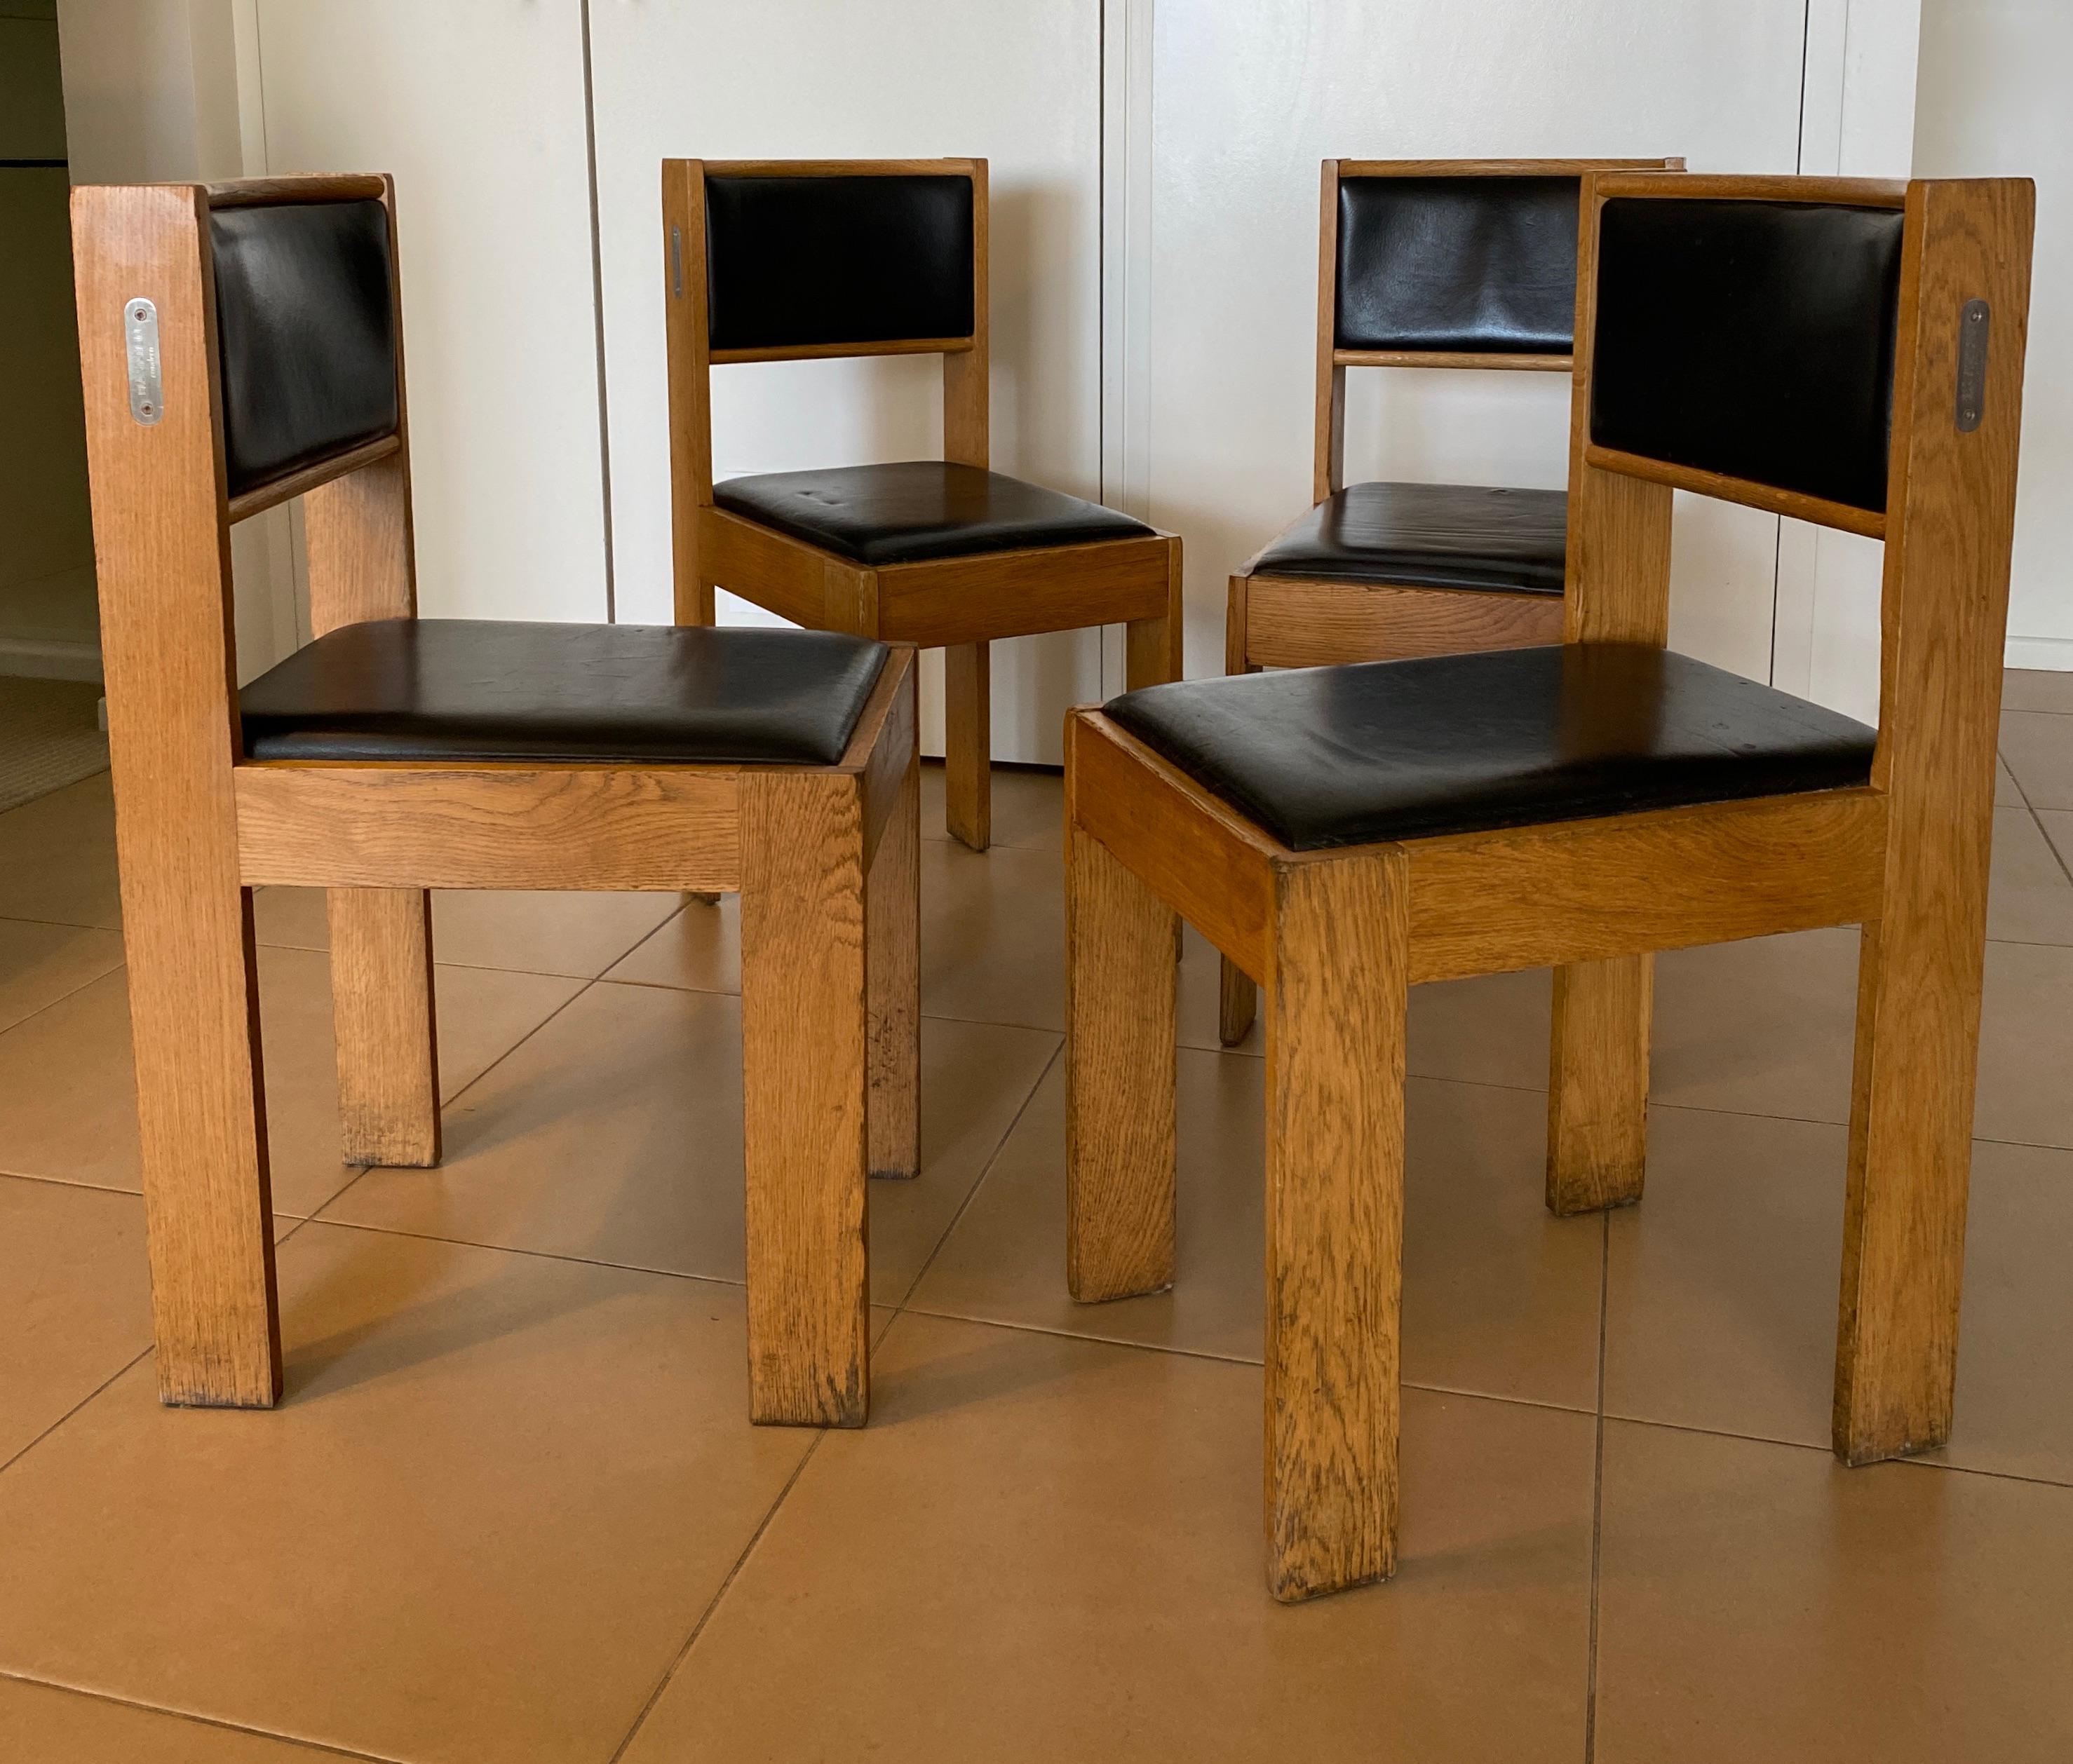 Bla' Station
Condeco chair
Design: Johan Lindau, 2OO3
Chair. Frame of solid oak 
Very comfortable with extraordinary shaped geometrical structure.
Leather and wood in excellent conditions.
Weight: 8,0
Price :$1,200/each chair
Available: 18